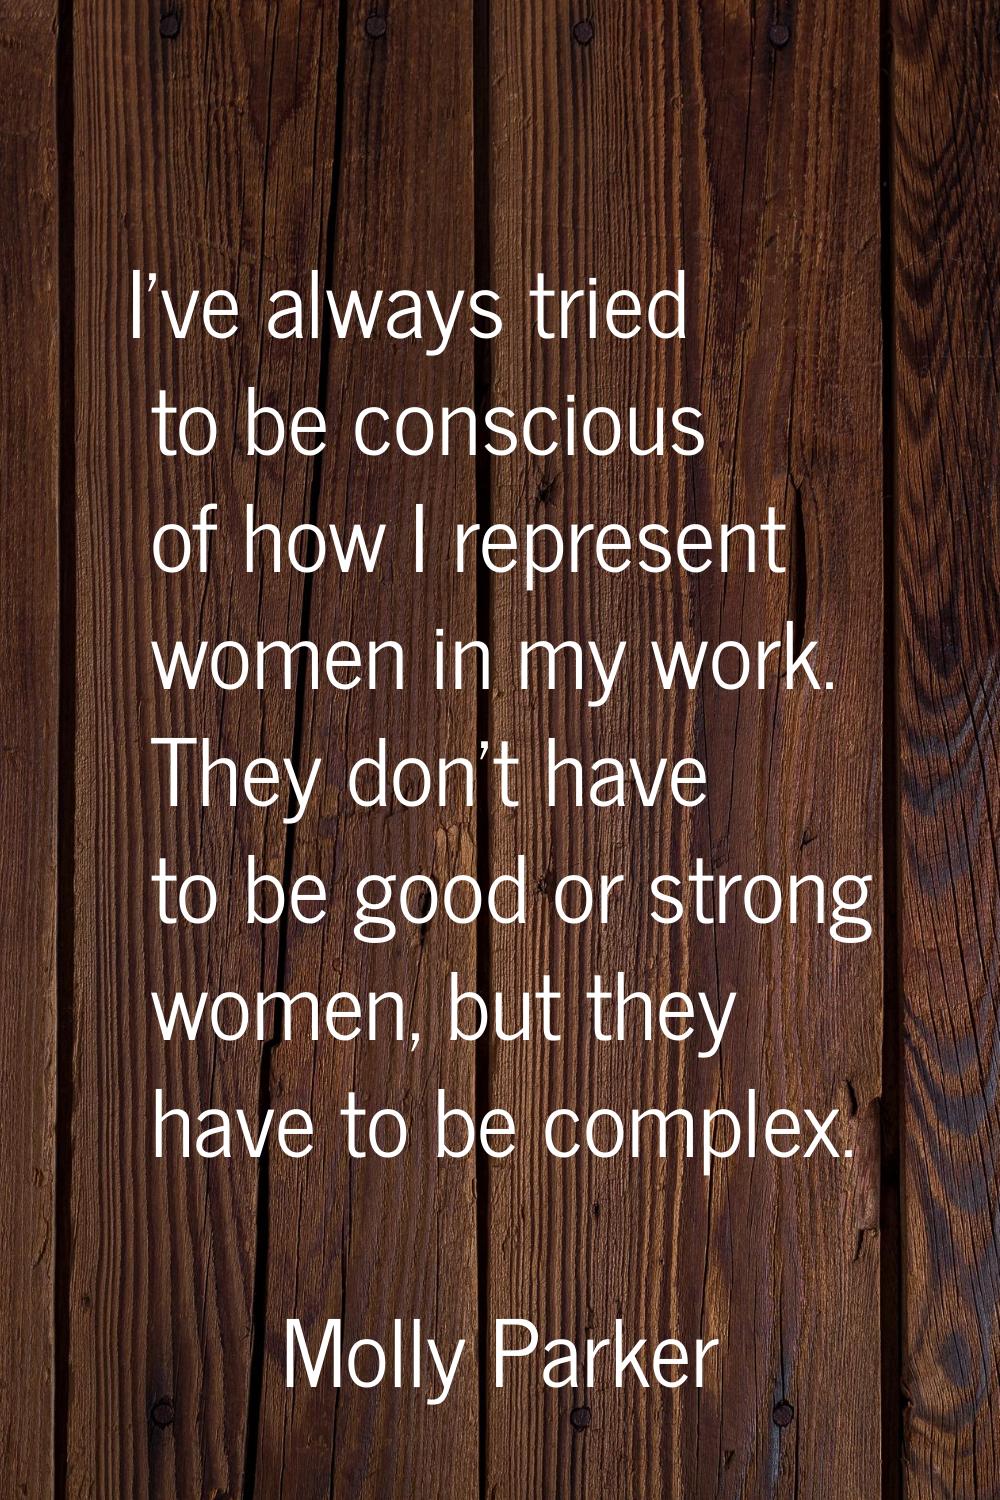 I've always tried to be conscious of how I represent women in my work. They don't have to be good o